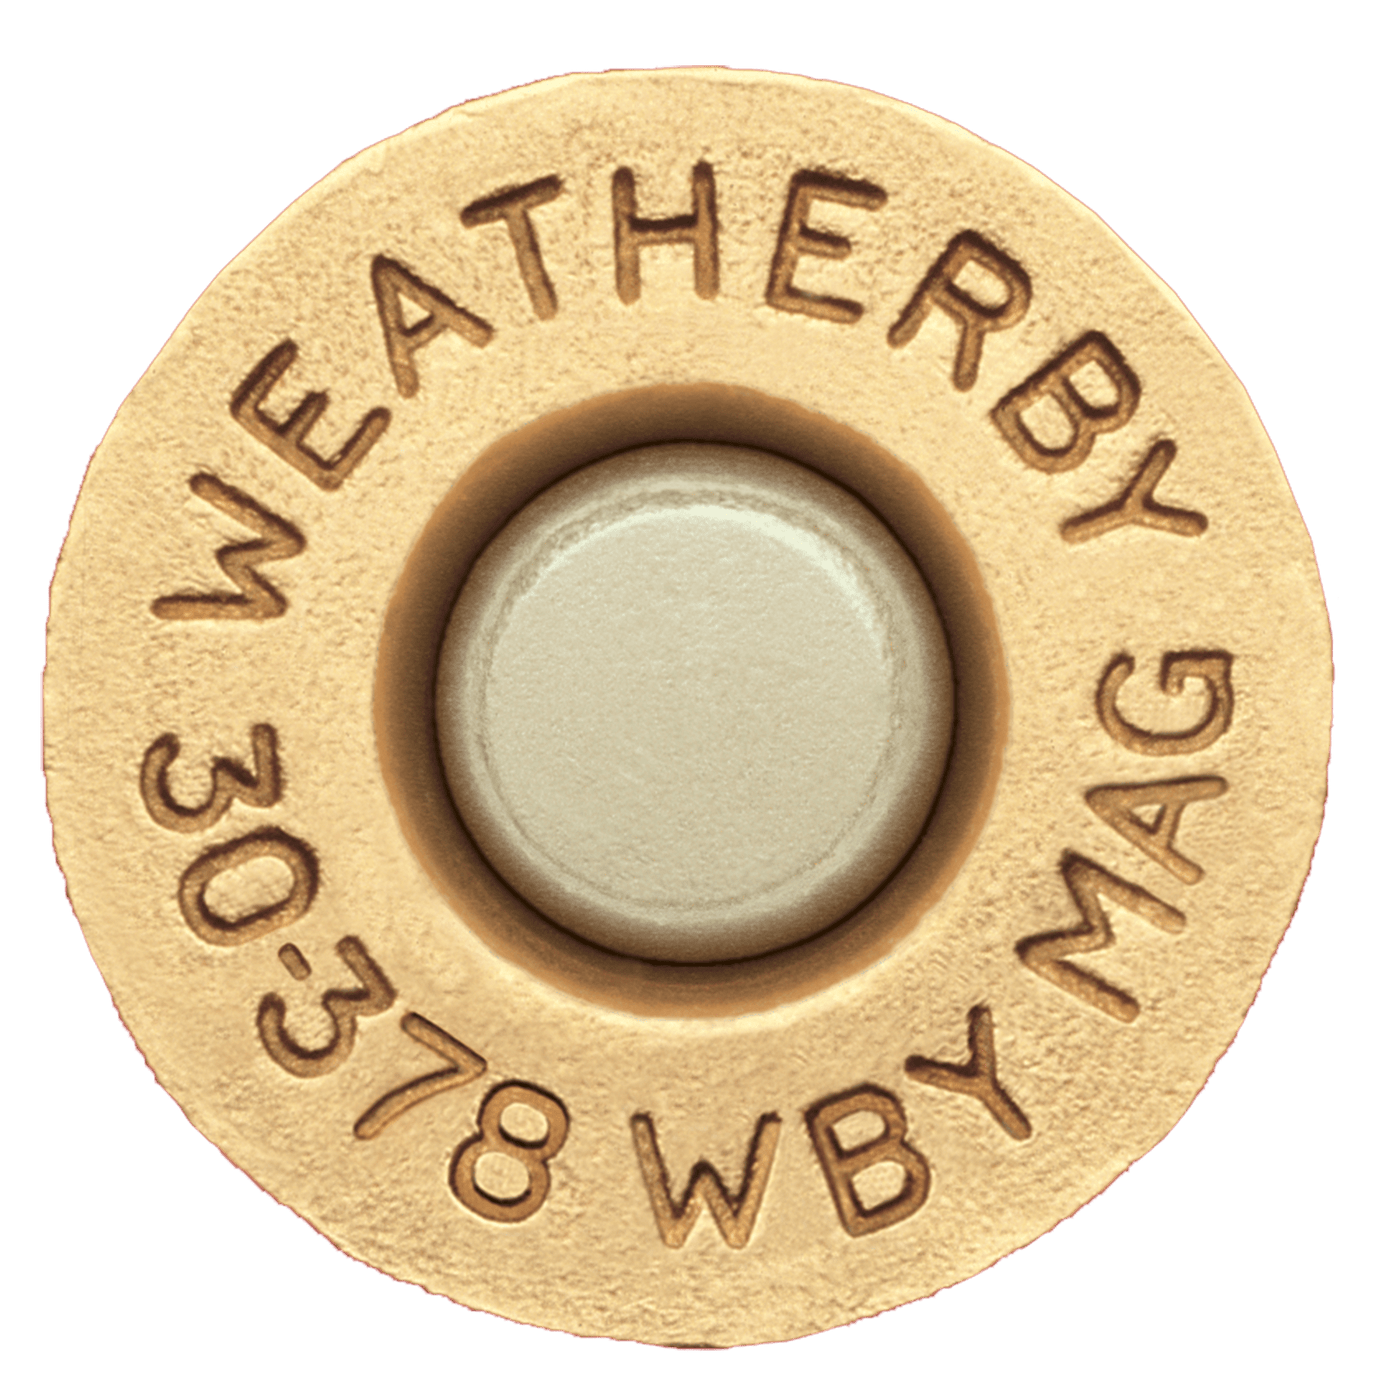 Weatherby Weatherby Unprimed Cases, Wthby Brass303  Up Brass 30378     20 Reloading